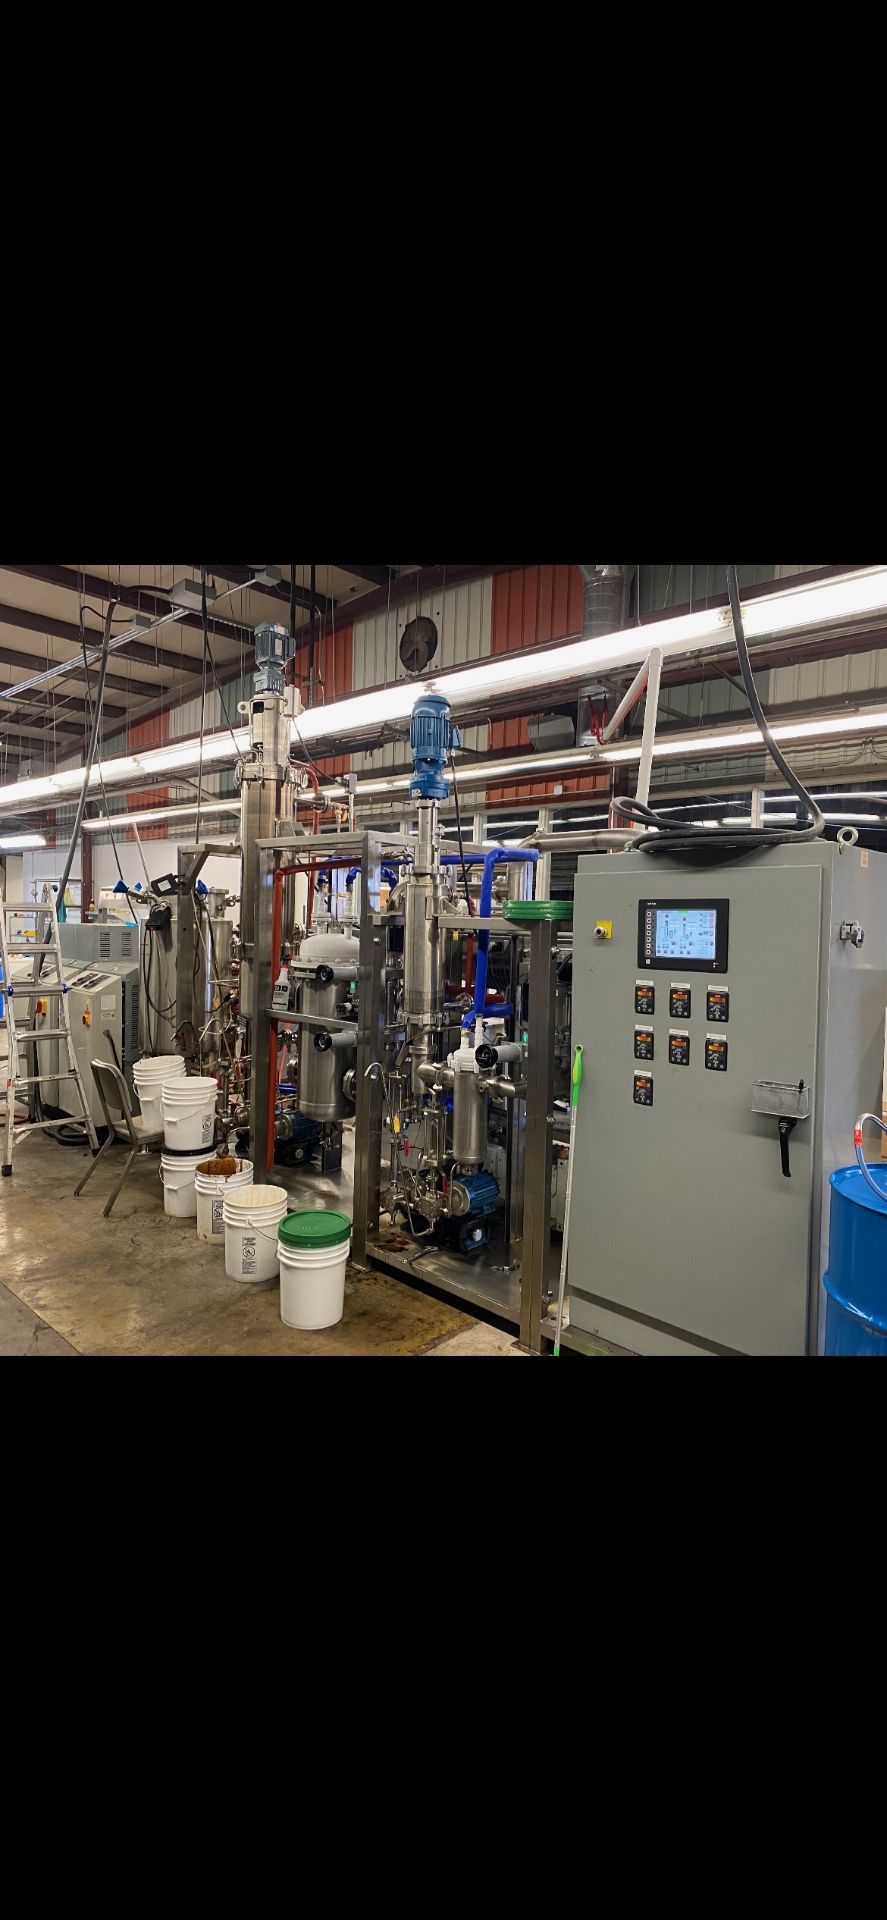 LOCATED IN MEDFORD, OR- Used Chemtech KD75/KD30 Dual-Stage Distillation Unit. Specs & Features: - - Image 8 of 8